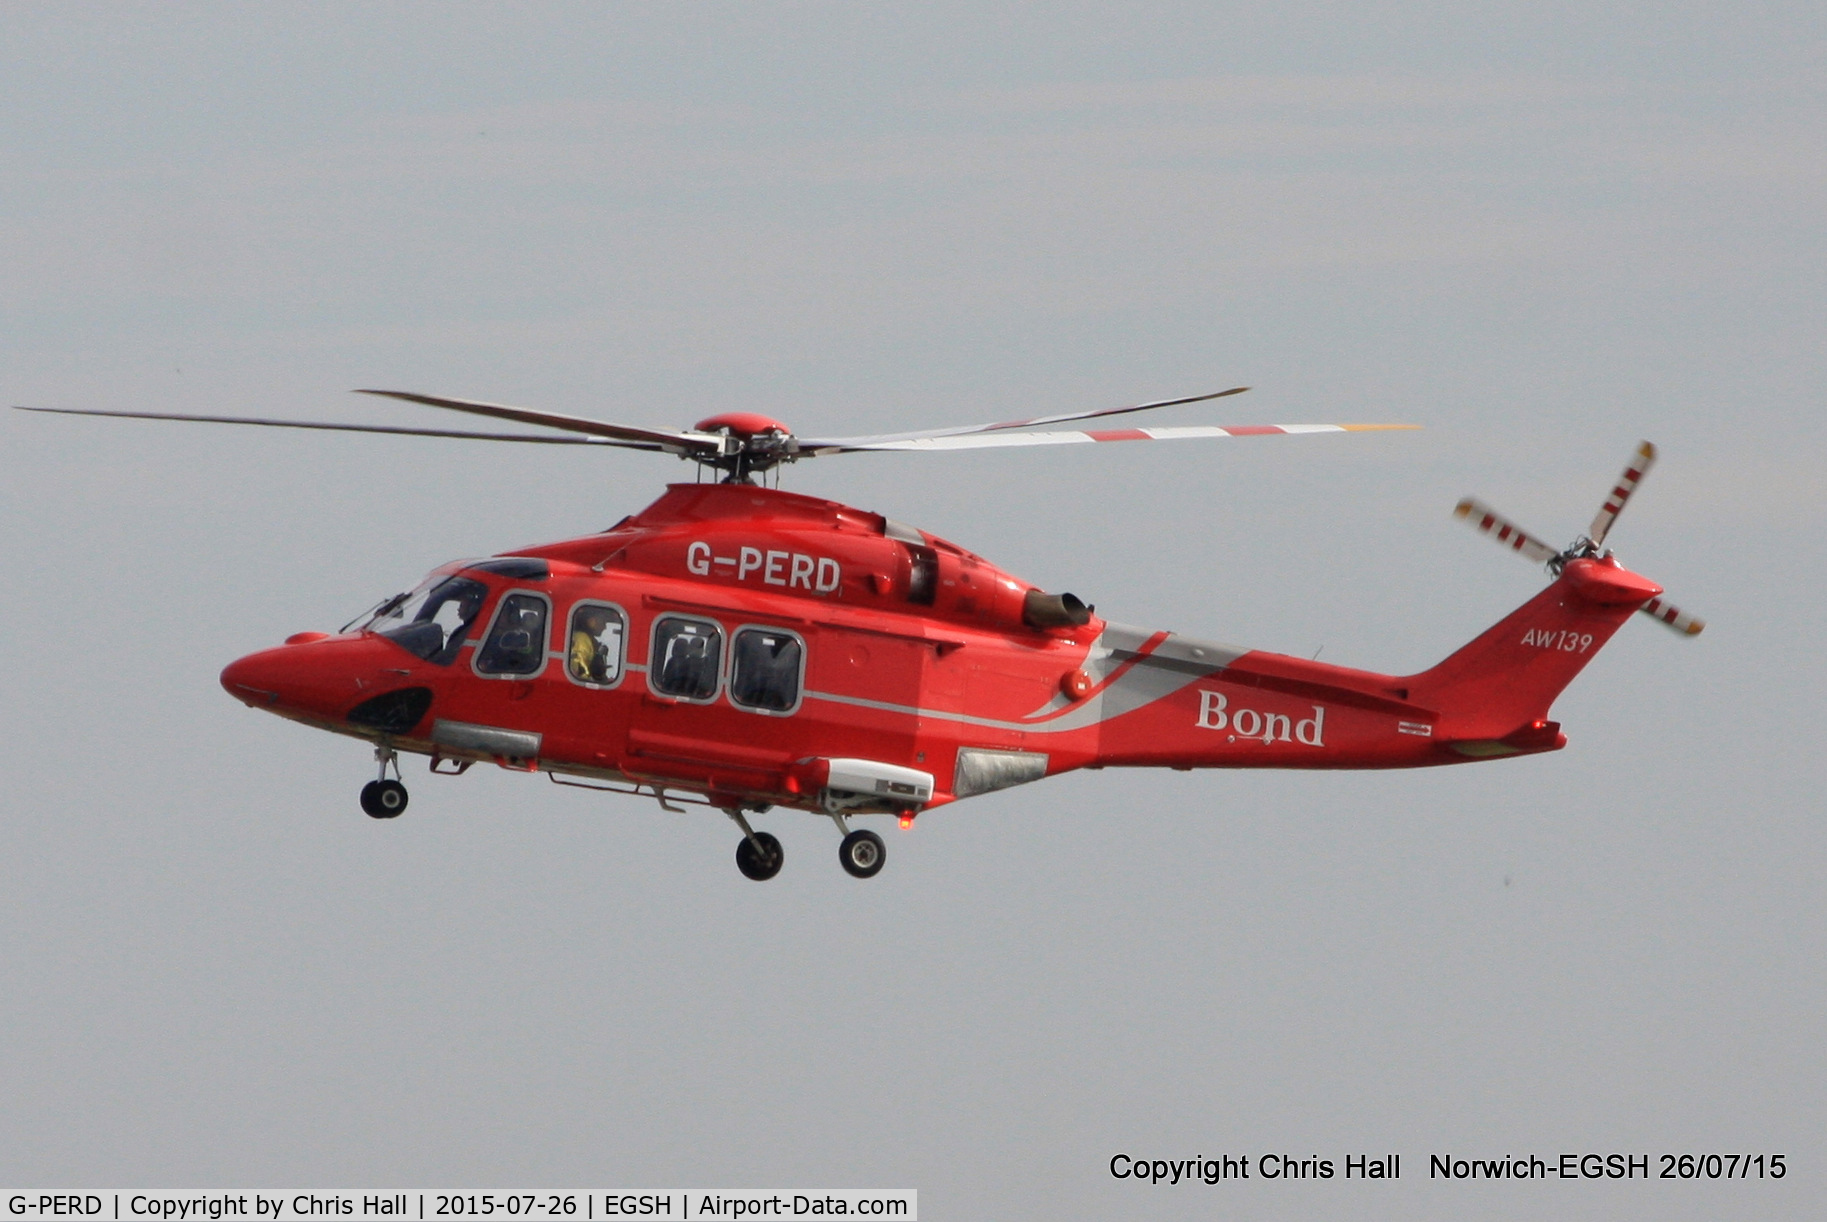 G-PERD, 2012 AgustaWestland AW-139 C/N 41270, Bond Offshore Helicopters Ltd